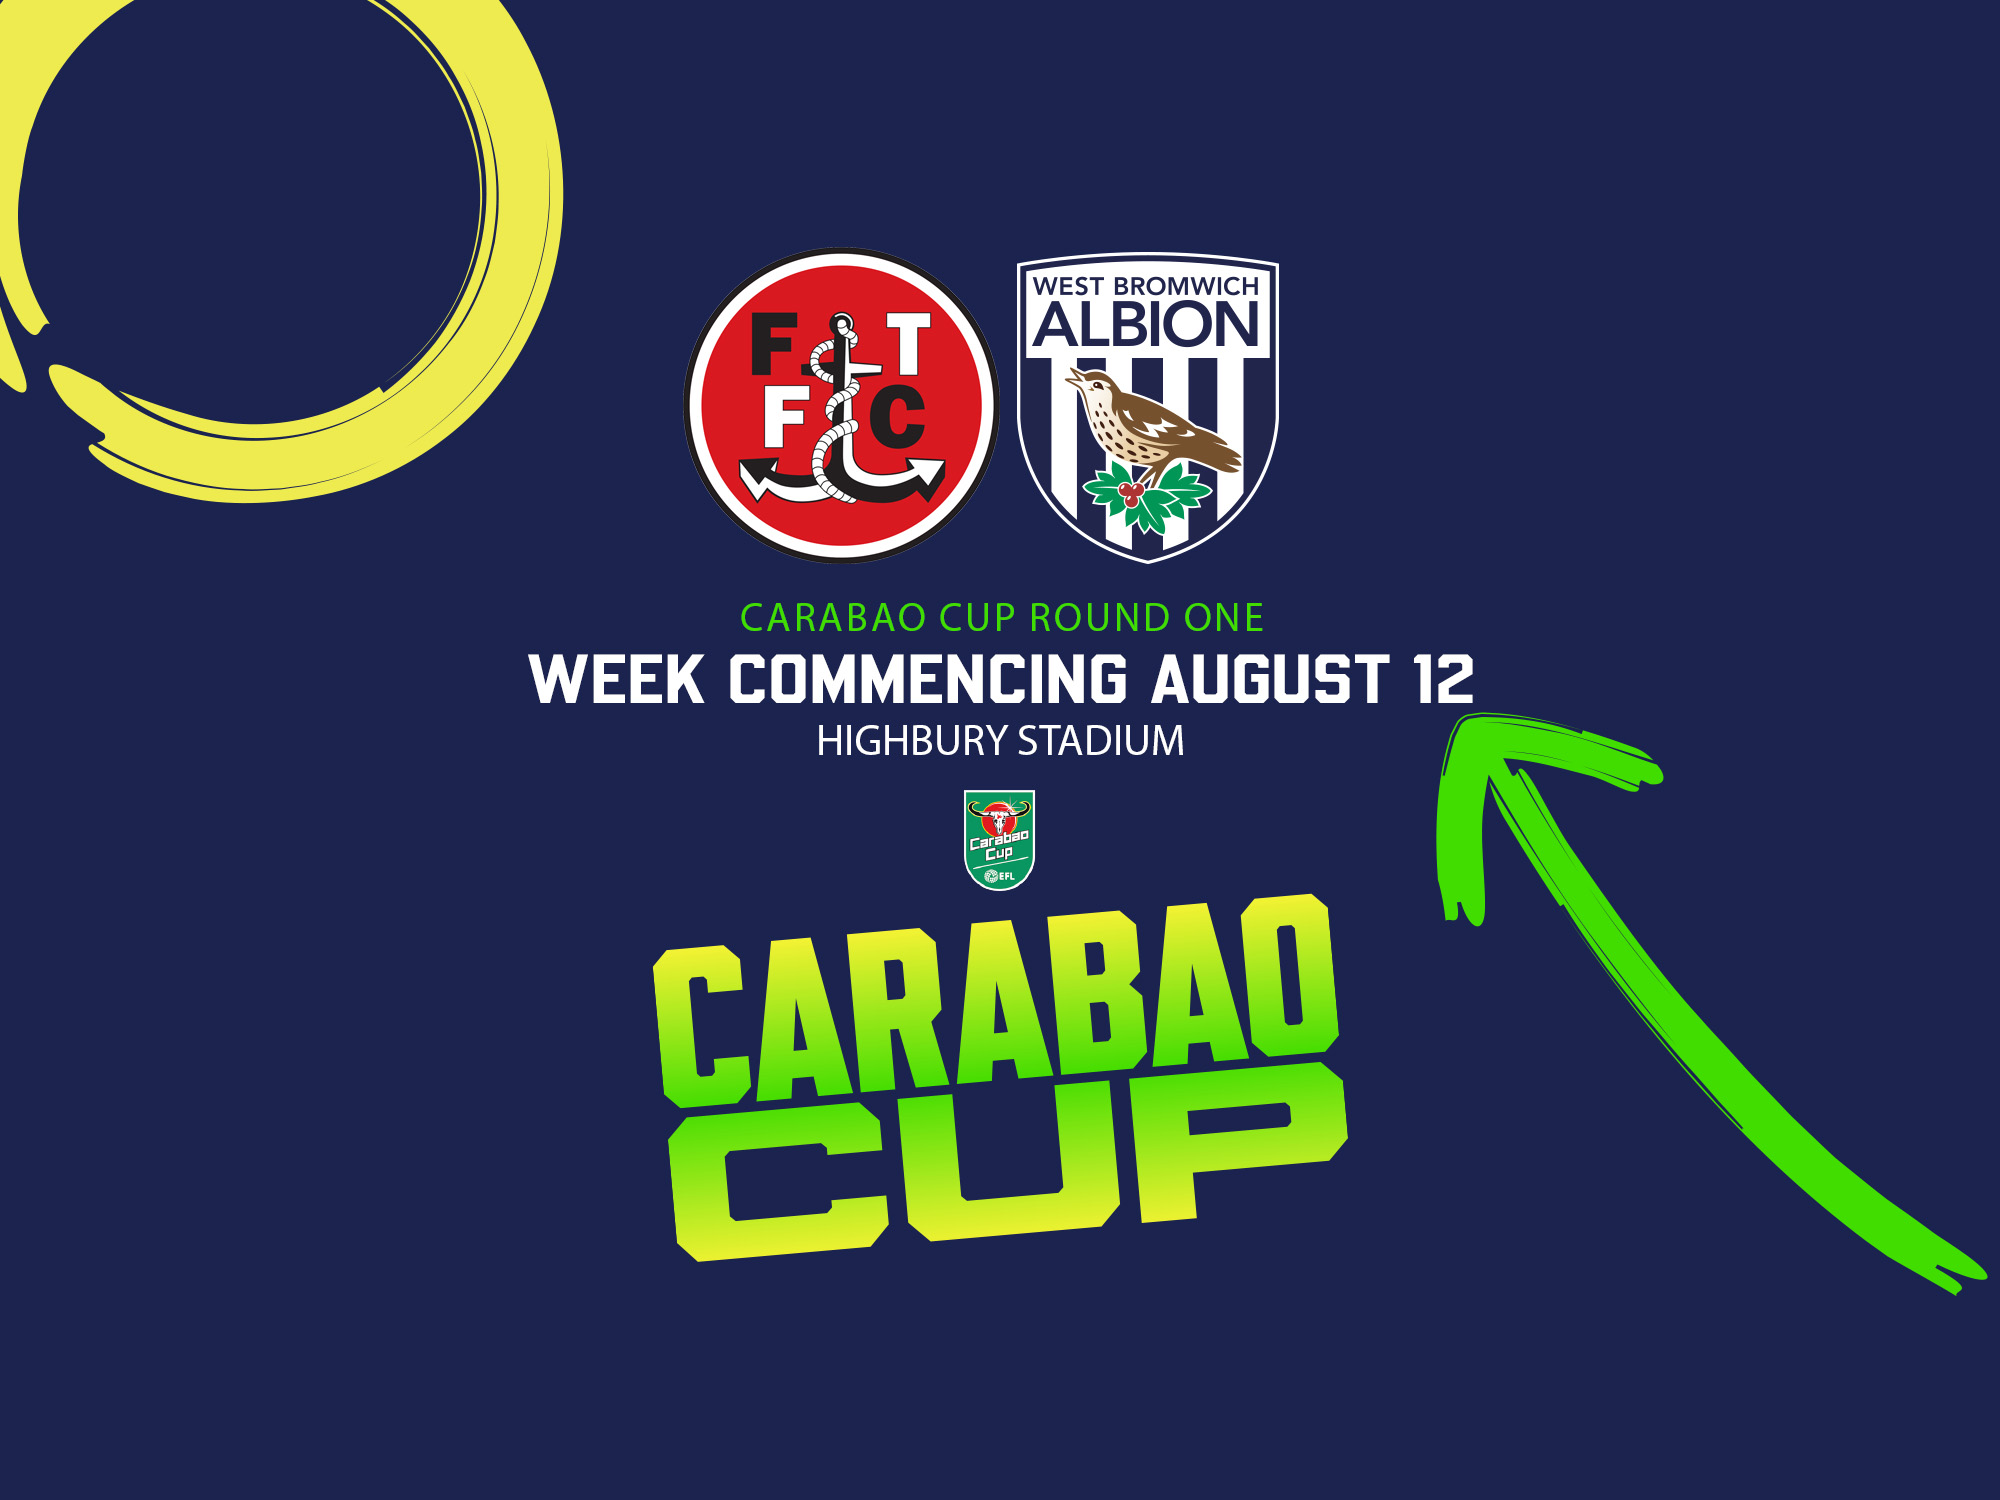 The Carabao Cup round one fixture graphic with Fleetwood Town and WBA badges on